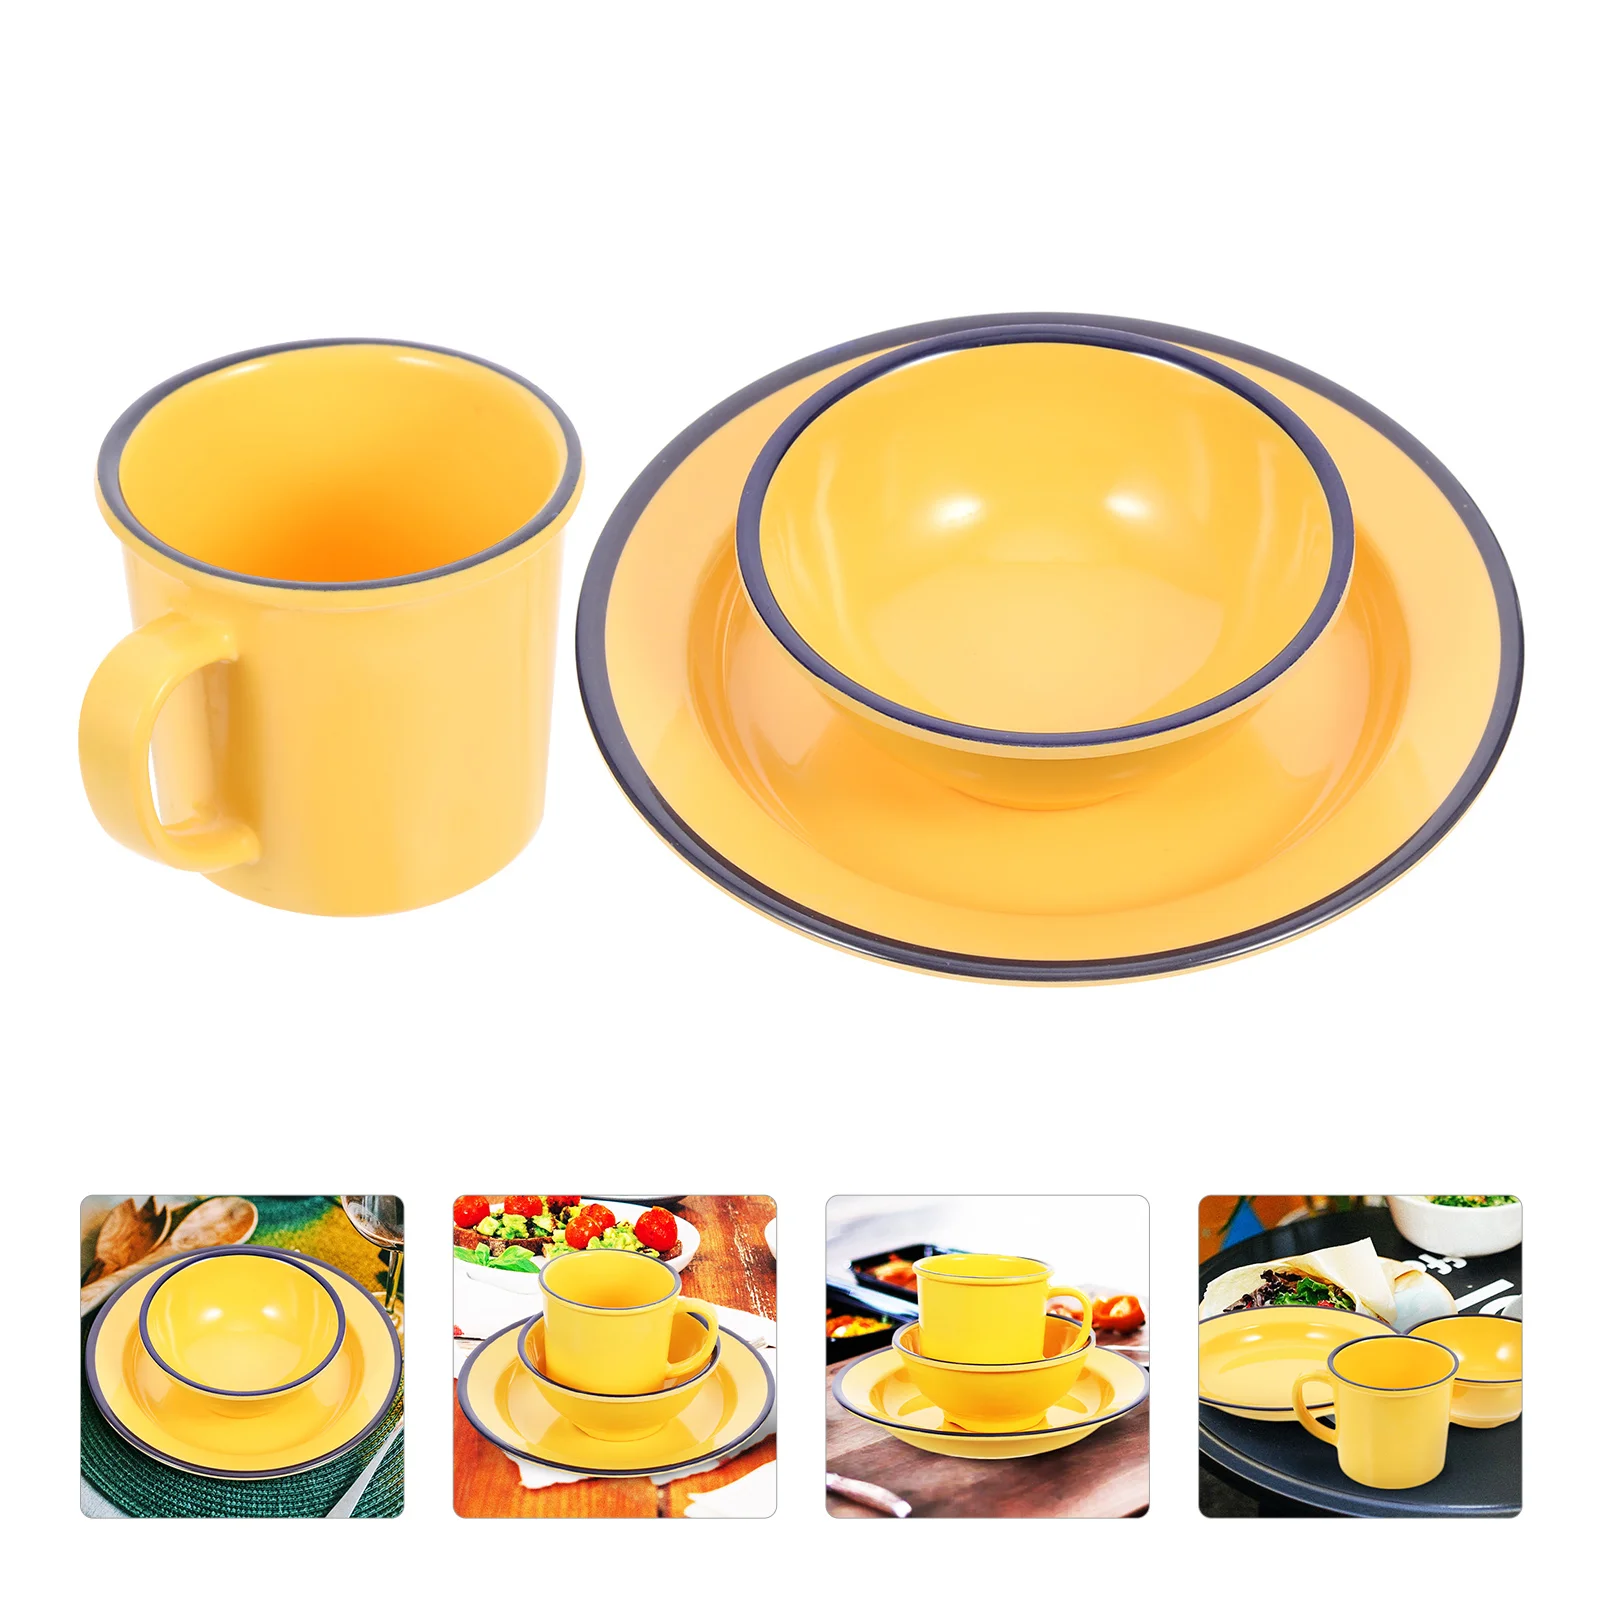 

Dinnerware Melamine Set Bowl Sets Plate Bowls Dish Plates Dinner Camping Cup Dishes Kitchen Mug Enamelware Serving Drinking Cups